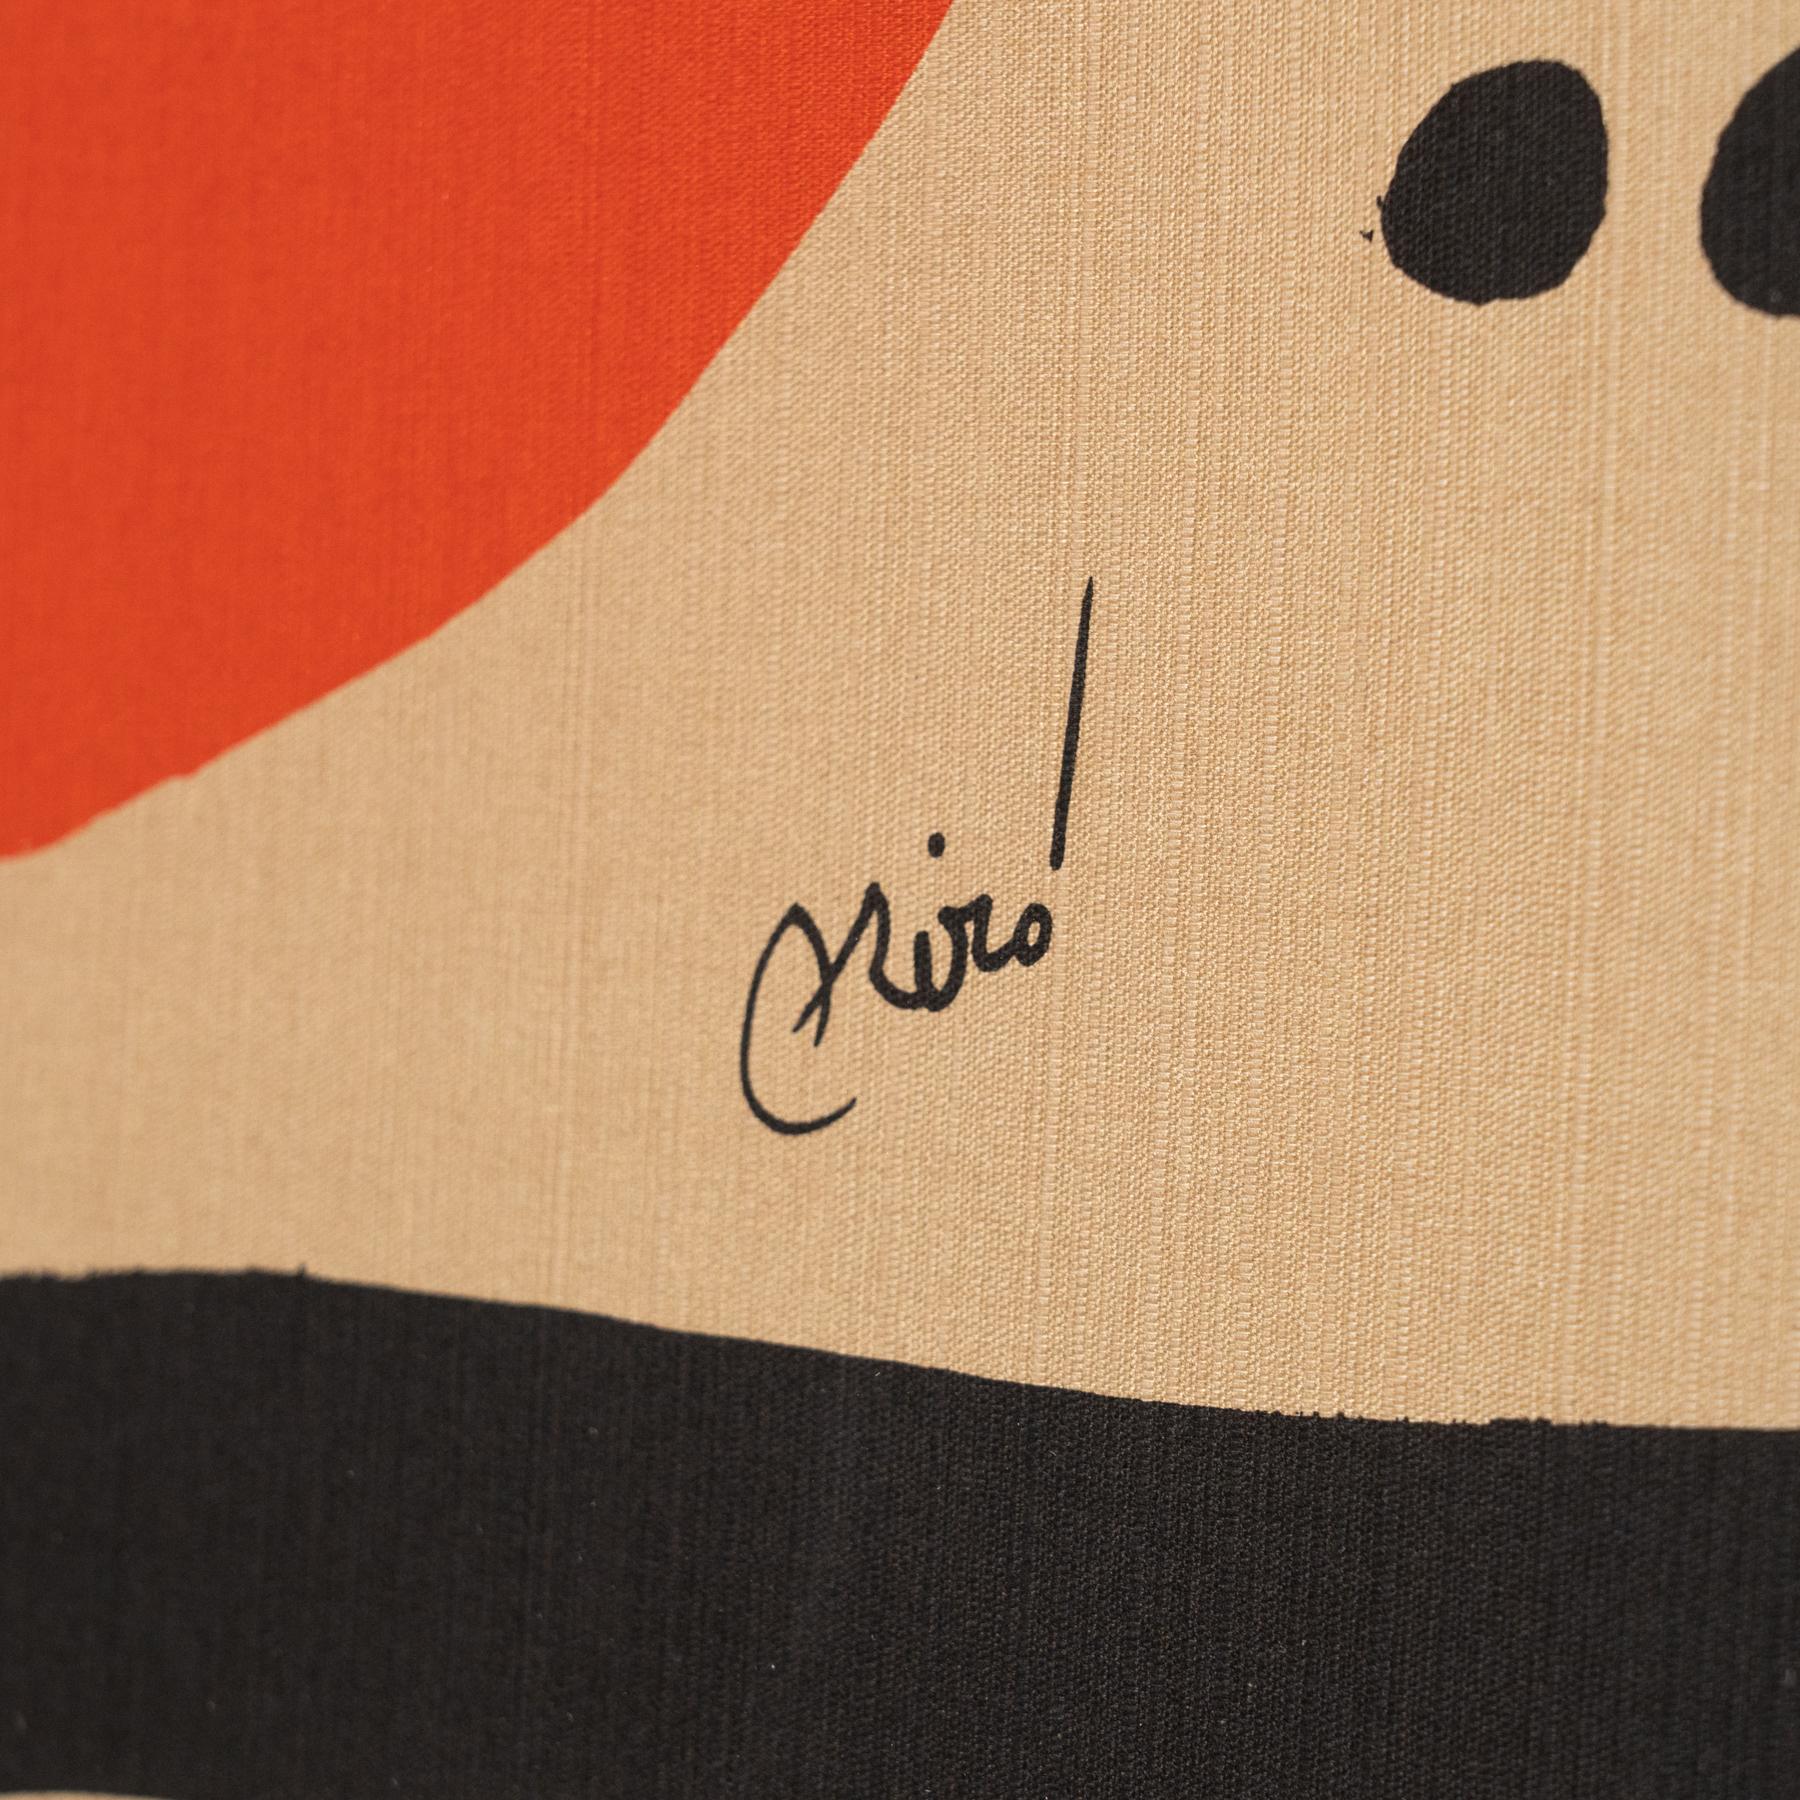 Joan Miro Framed Lithograph in Textile Fabric, circa 1970 For Sale 4